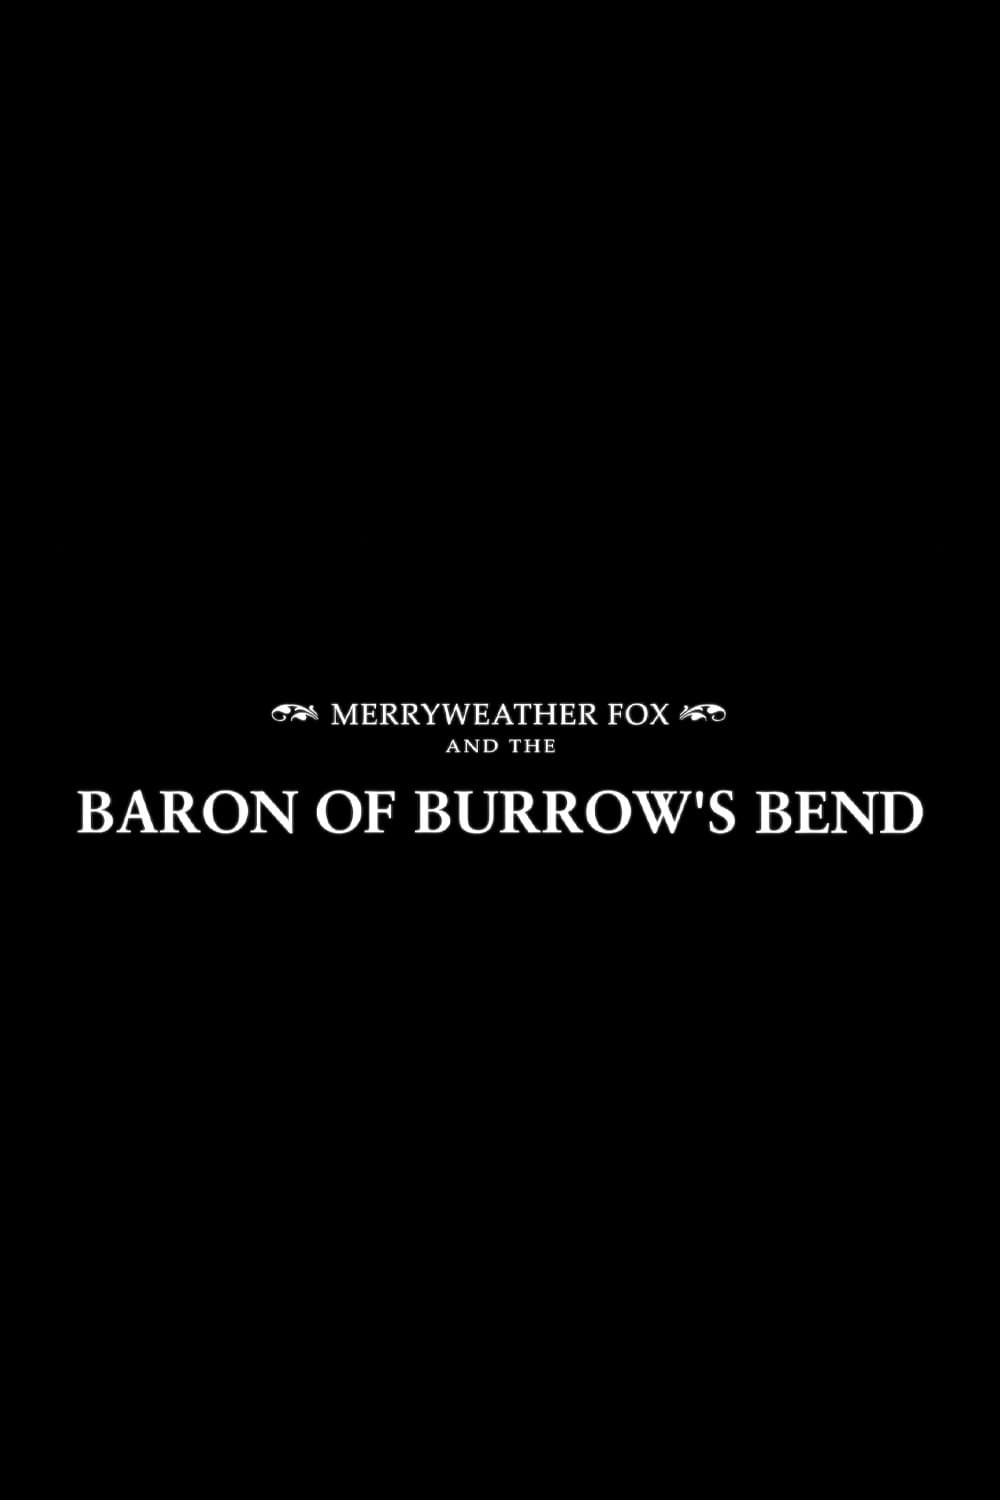 Merryweather Fox and the Baron of Burrow's Bend